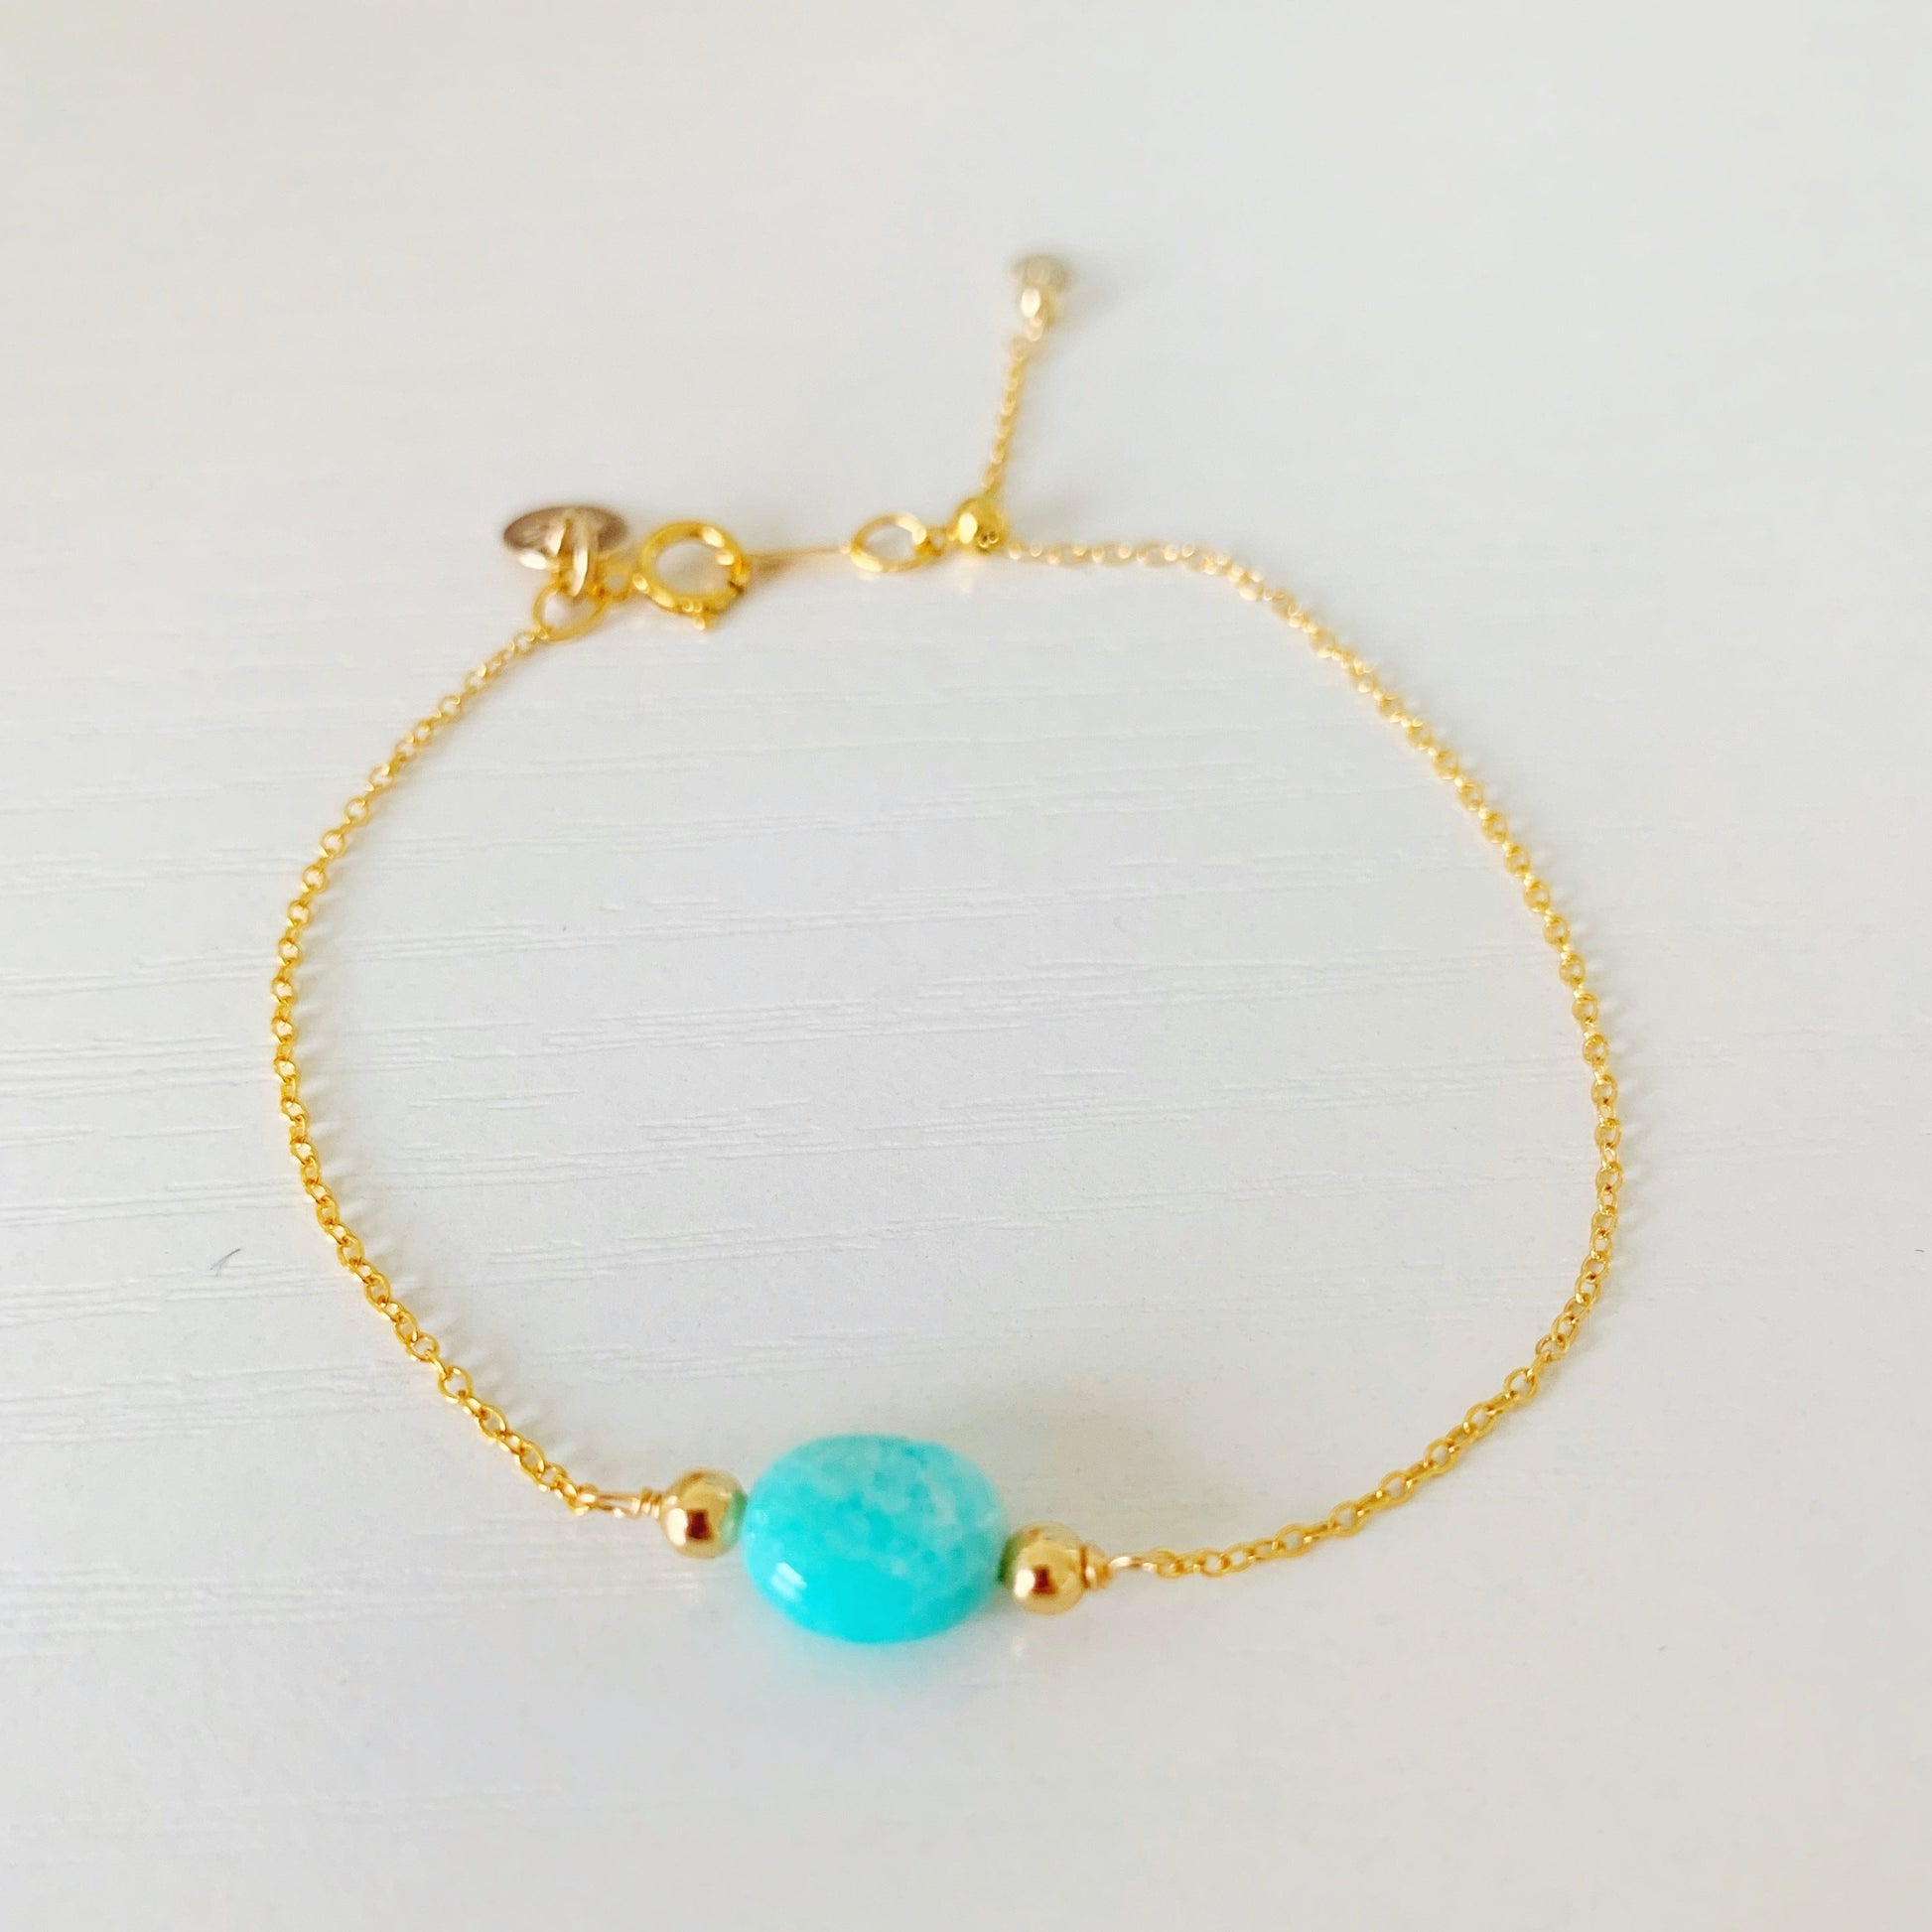 laguna adjustable bracelet is created on a thin 14k gold filled chain with an oval amazonite bead at the center. this bracelet is photographed on a white surface